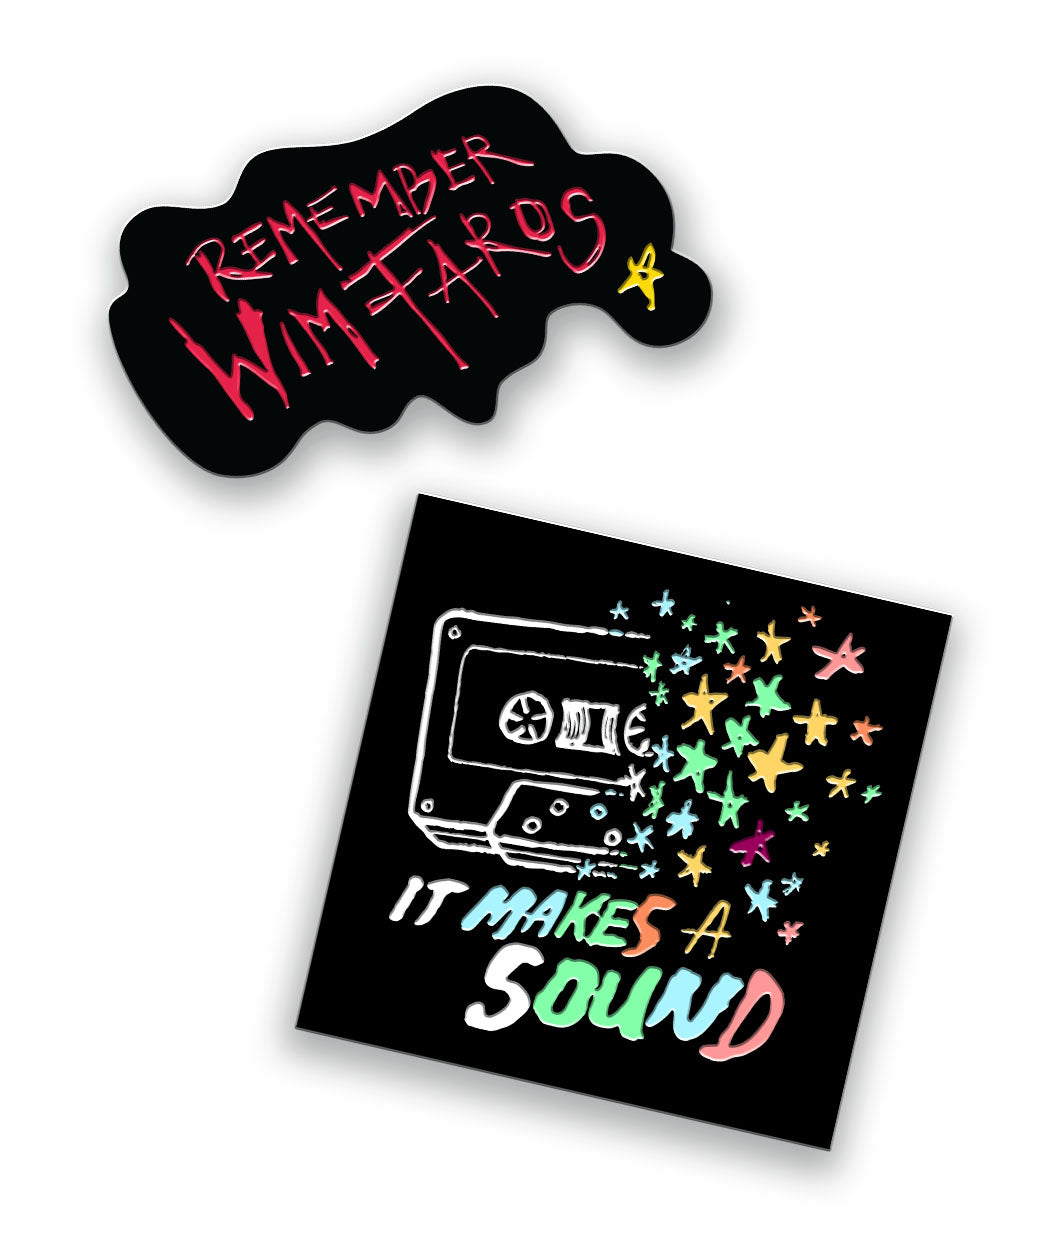 Two detached black pins. One pin with a cassette tape dissolving into colorful stars. The words "It Makes a Sound" are written below. The other pin is blob shaped with the words "Remember Wim Faros" written in red and a small yellow star.